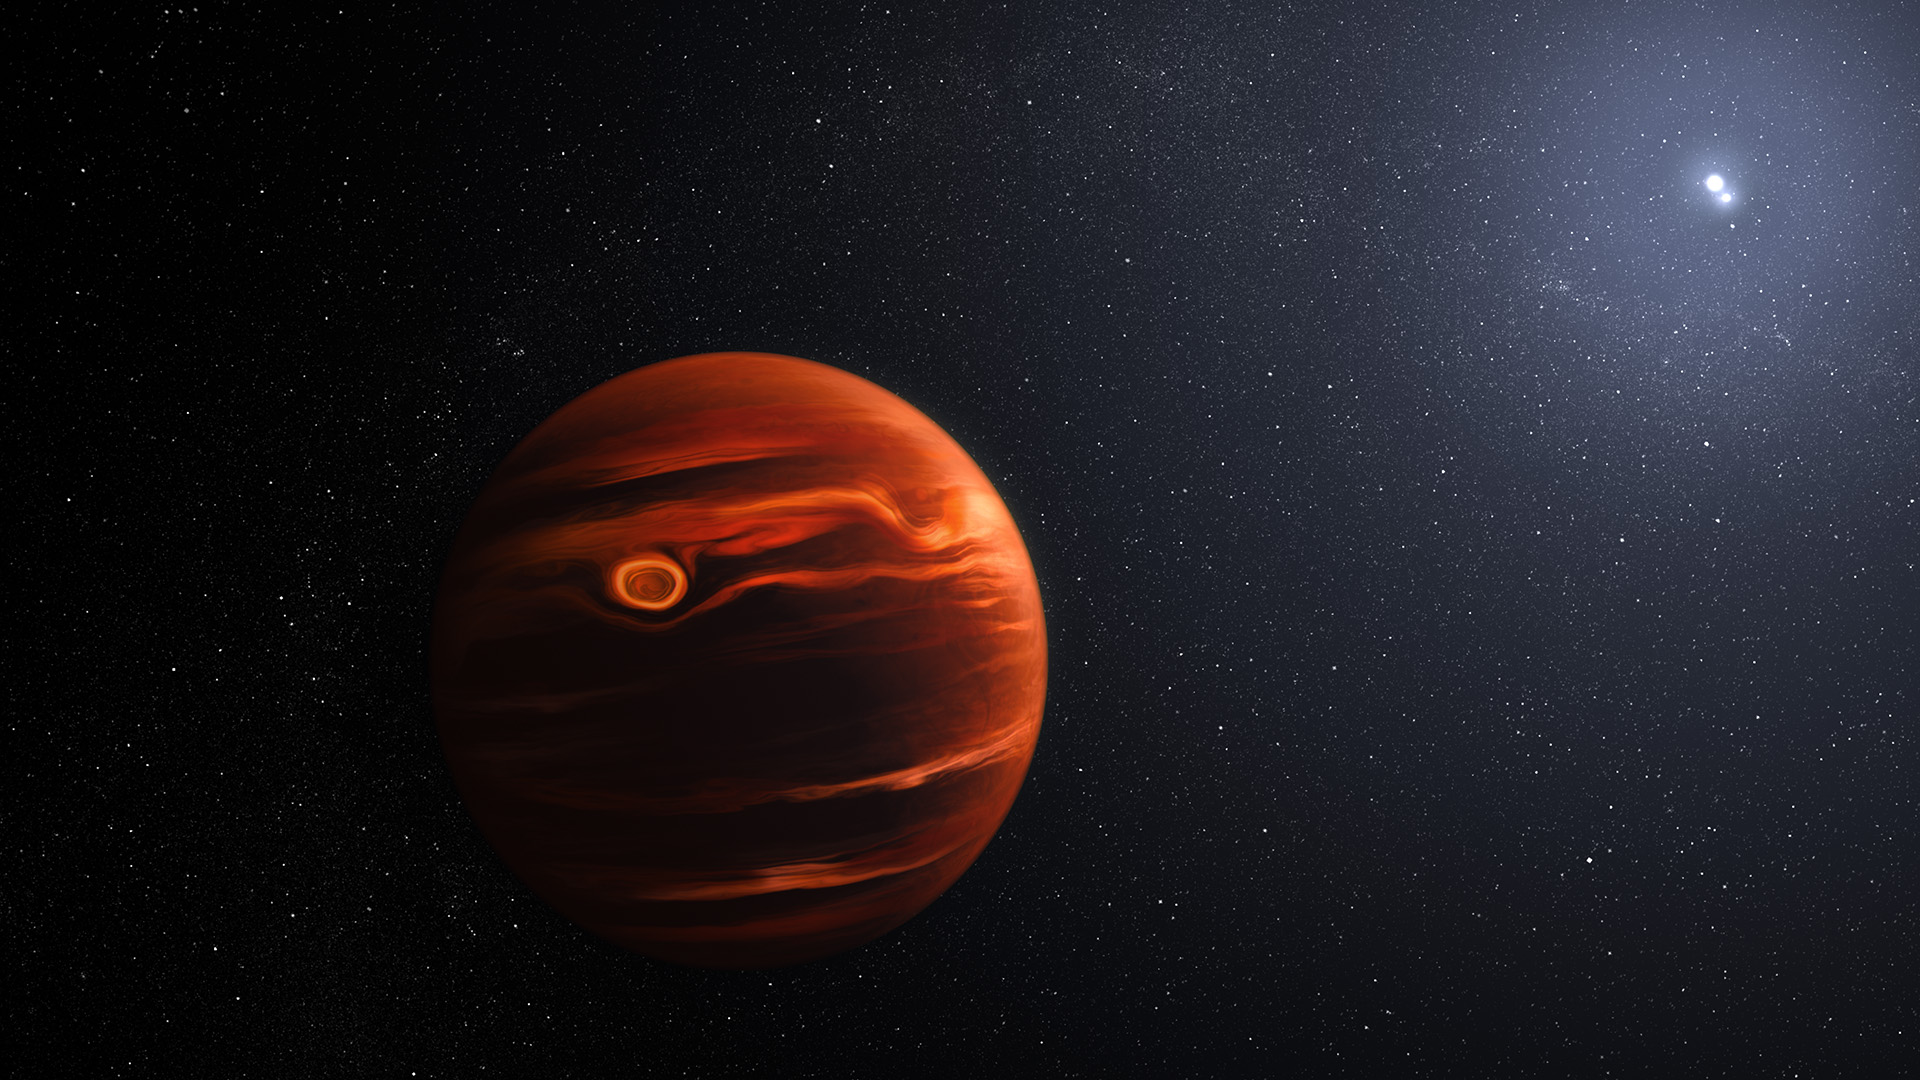 James Webb Telescope spies hot, gritty clouds in skies of huge exoplanet with 2 suns